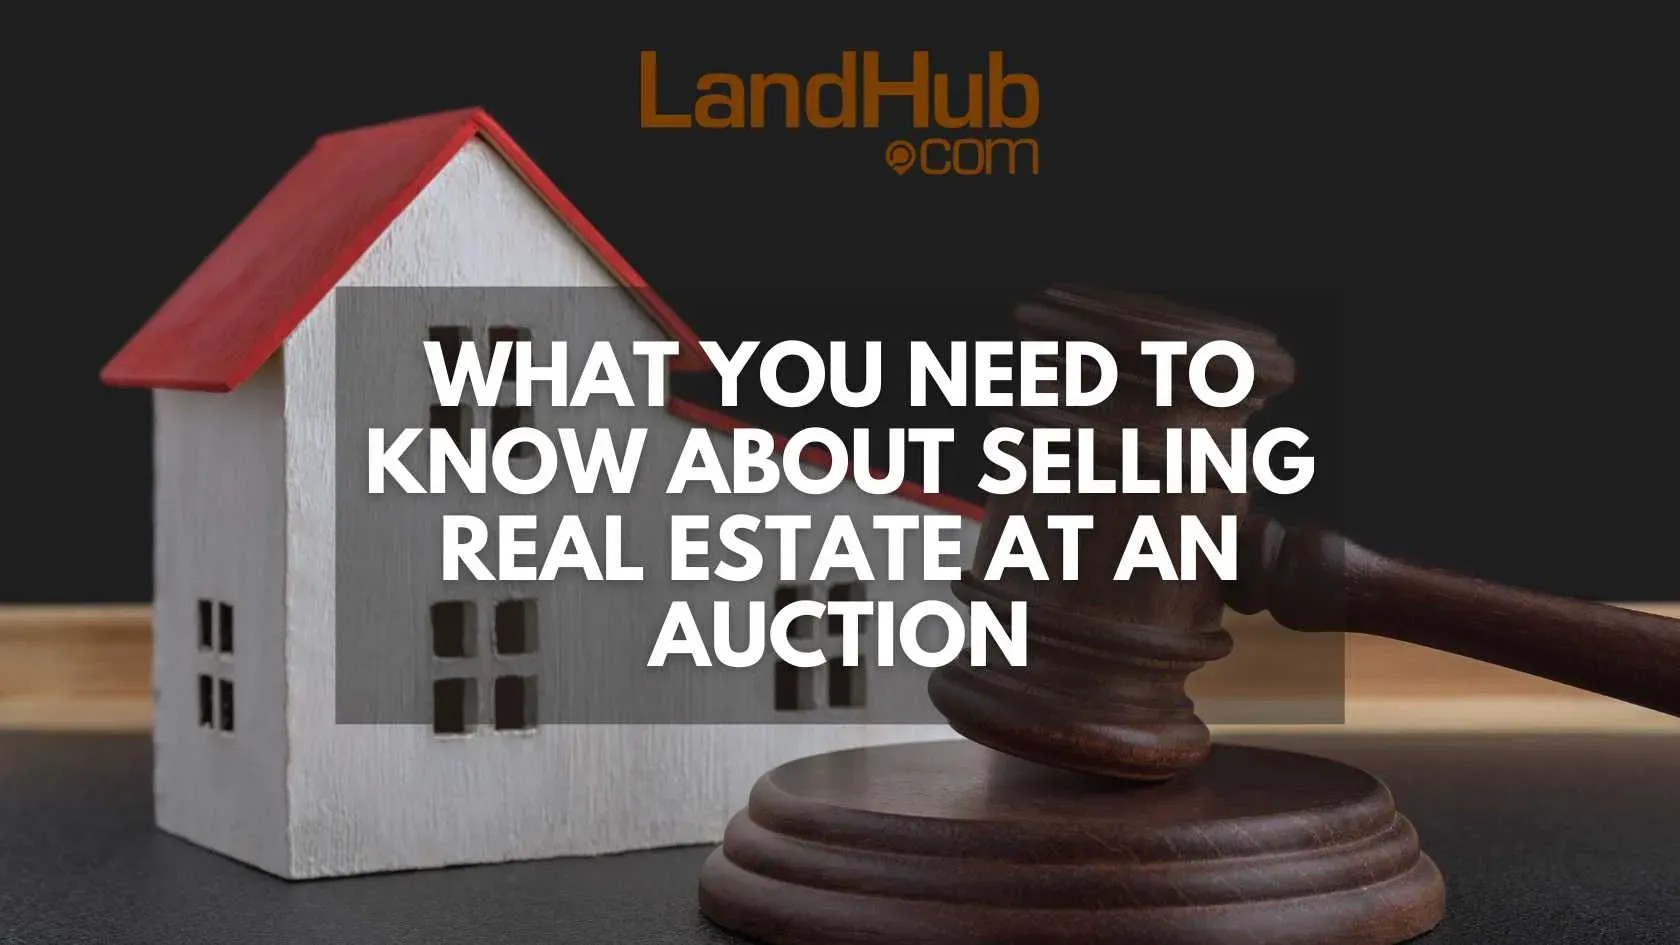 What You Need to Know About Selling Real Estate at an Auction